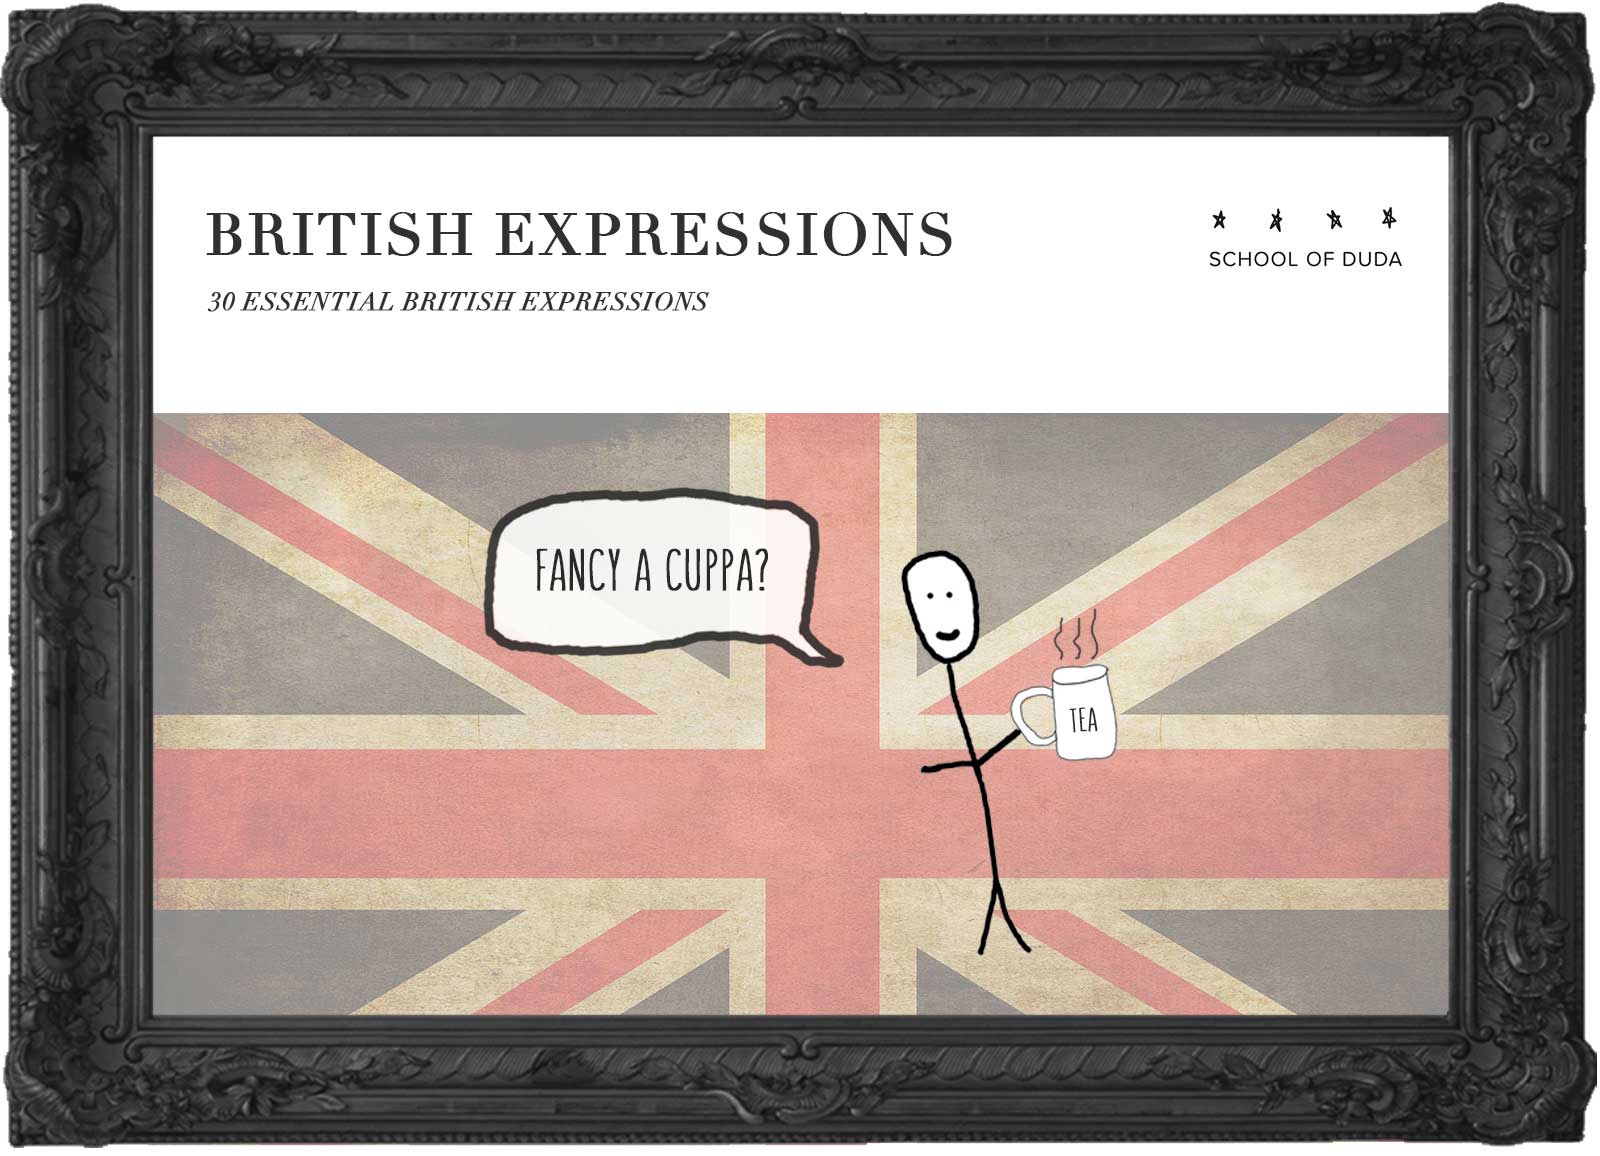 BRITISH EXPRESSIONS - English Course